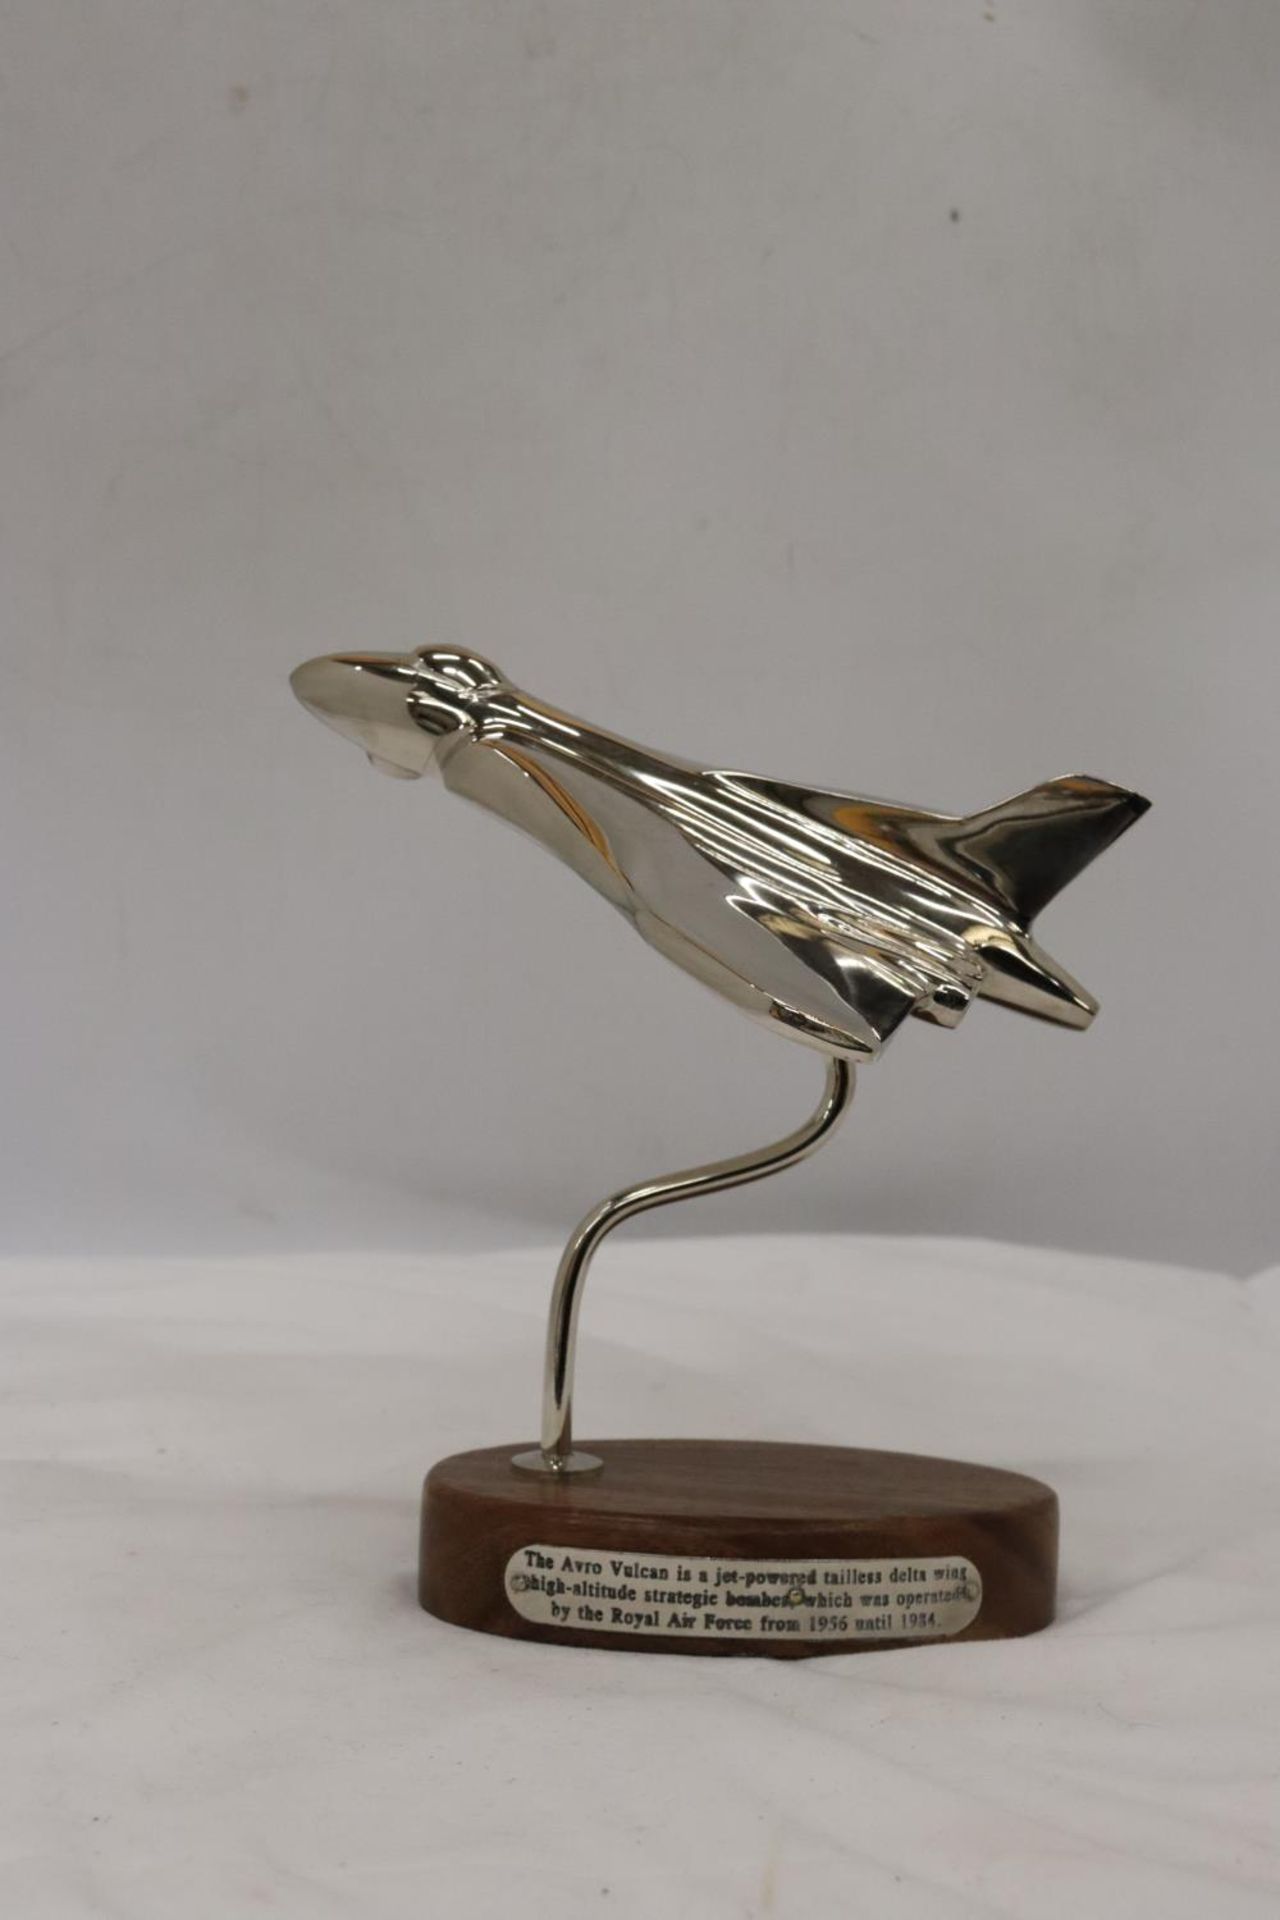 A CHROME MODEL OF AN AVRO VULCAN AEROPLANE ON A HARDWOOD BASE WITH HISTORY PLAQUE, HEIGHT 20 CM - Image 2 of 6